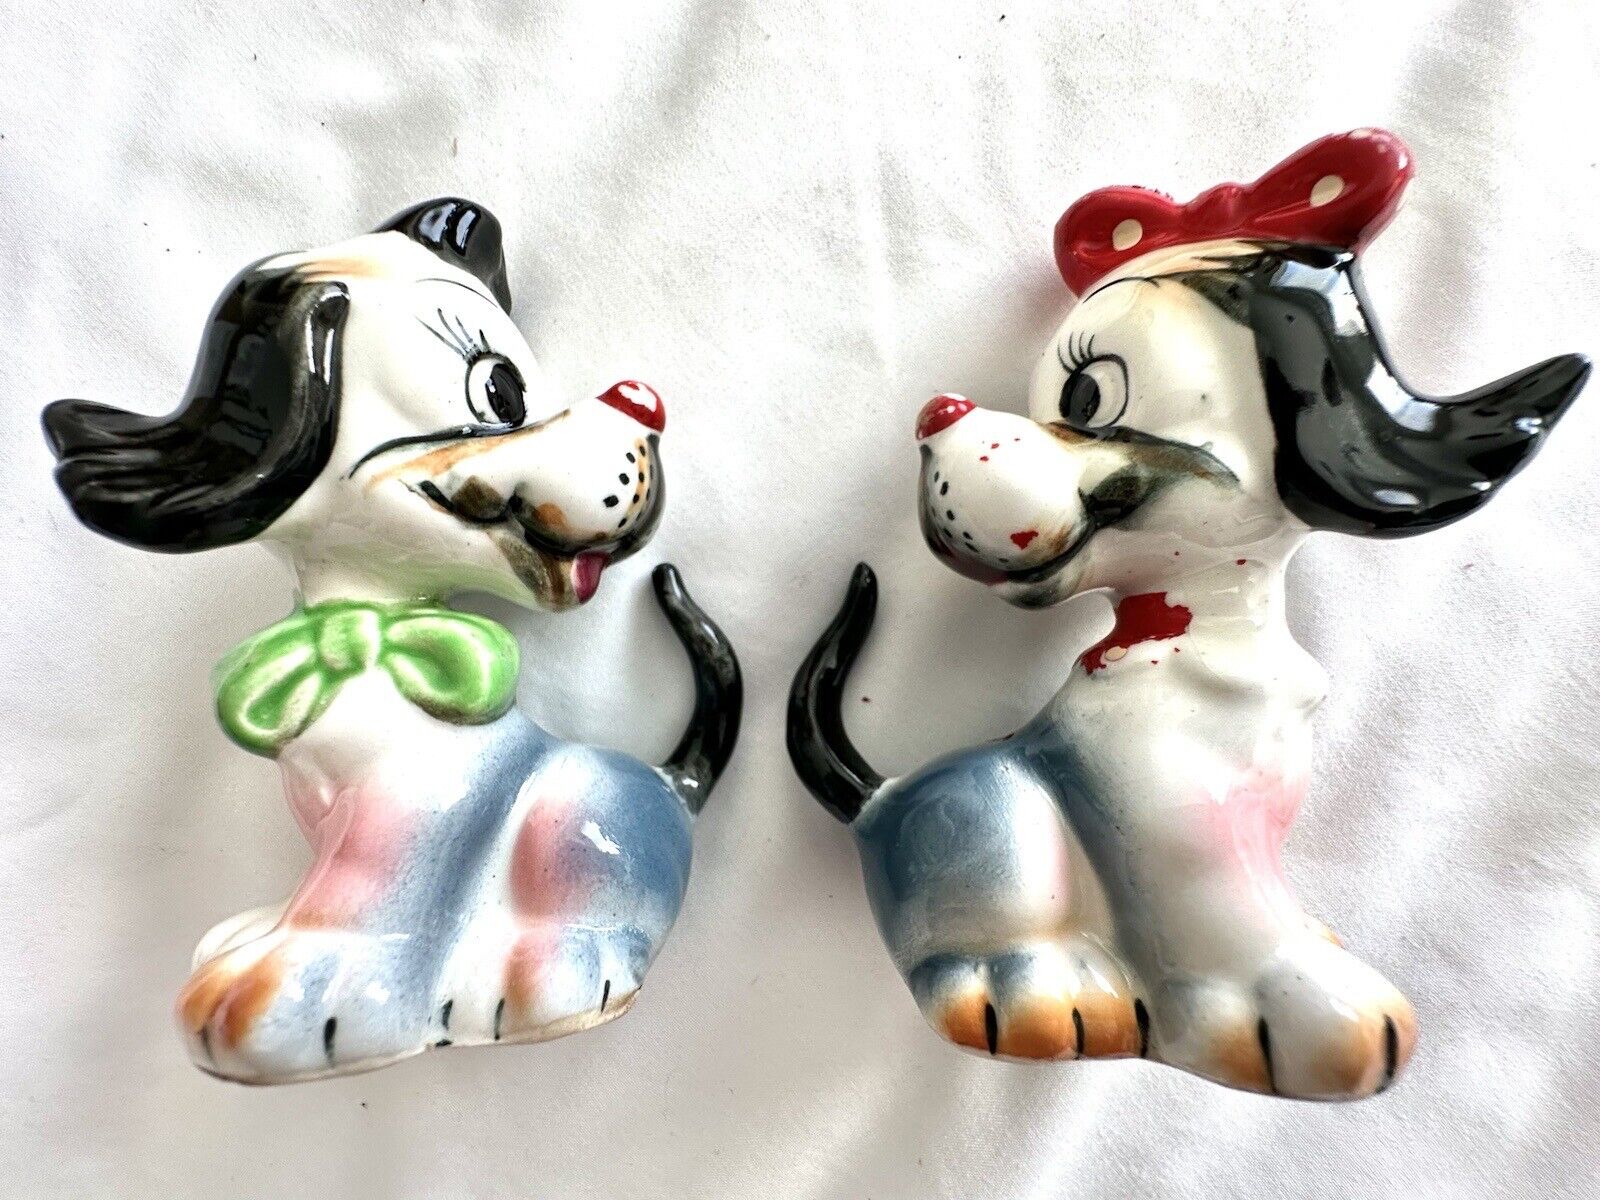 Collectible Antique Vintage Cute Animal Puppy Dog Ceramic Salt & Pepper Shakers